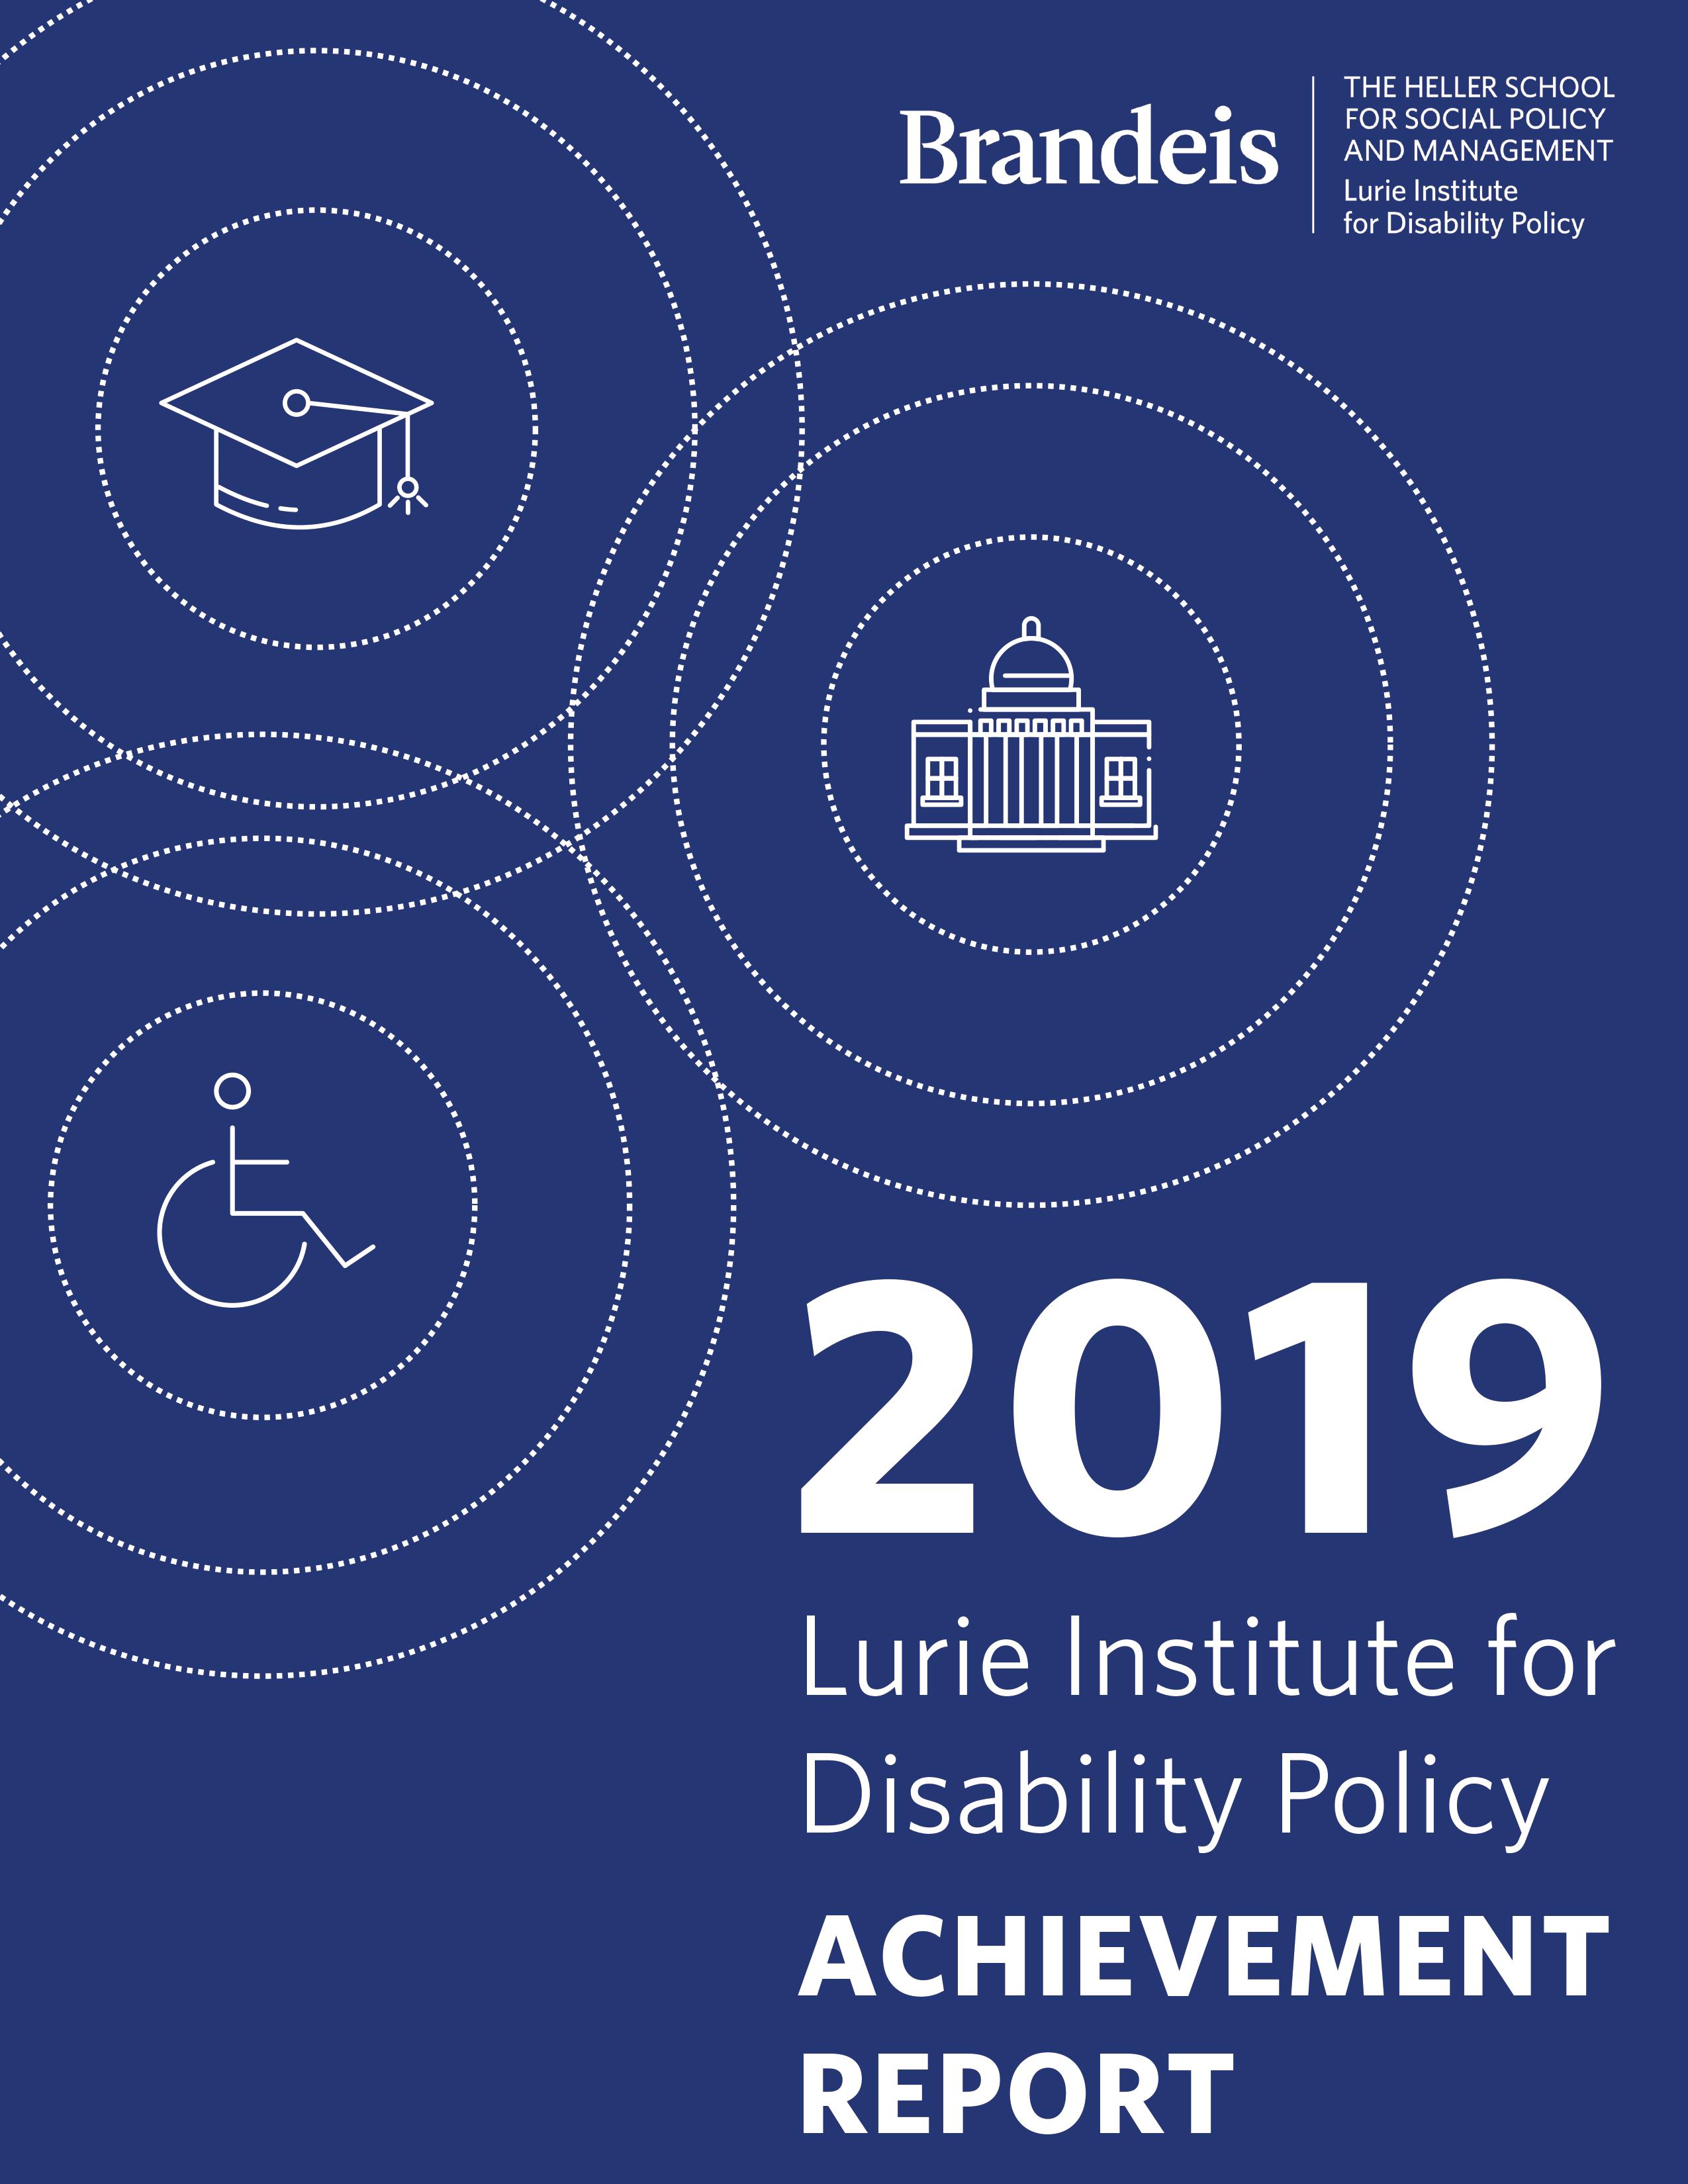 Lurie Institute for Disability Policy 2019 Achievement Report